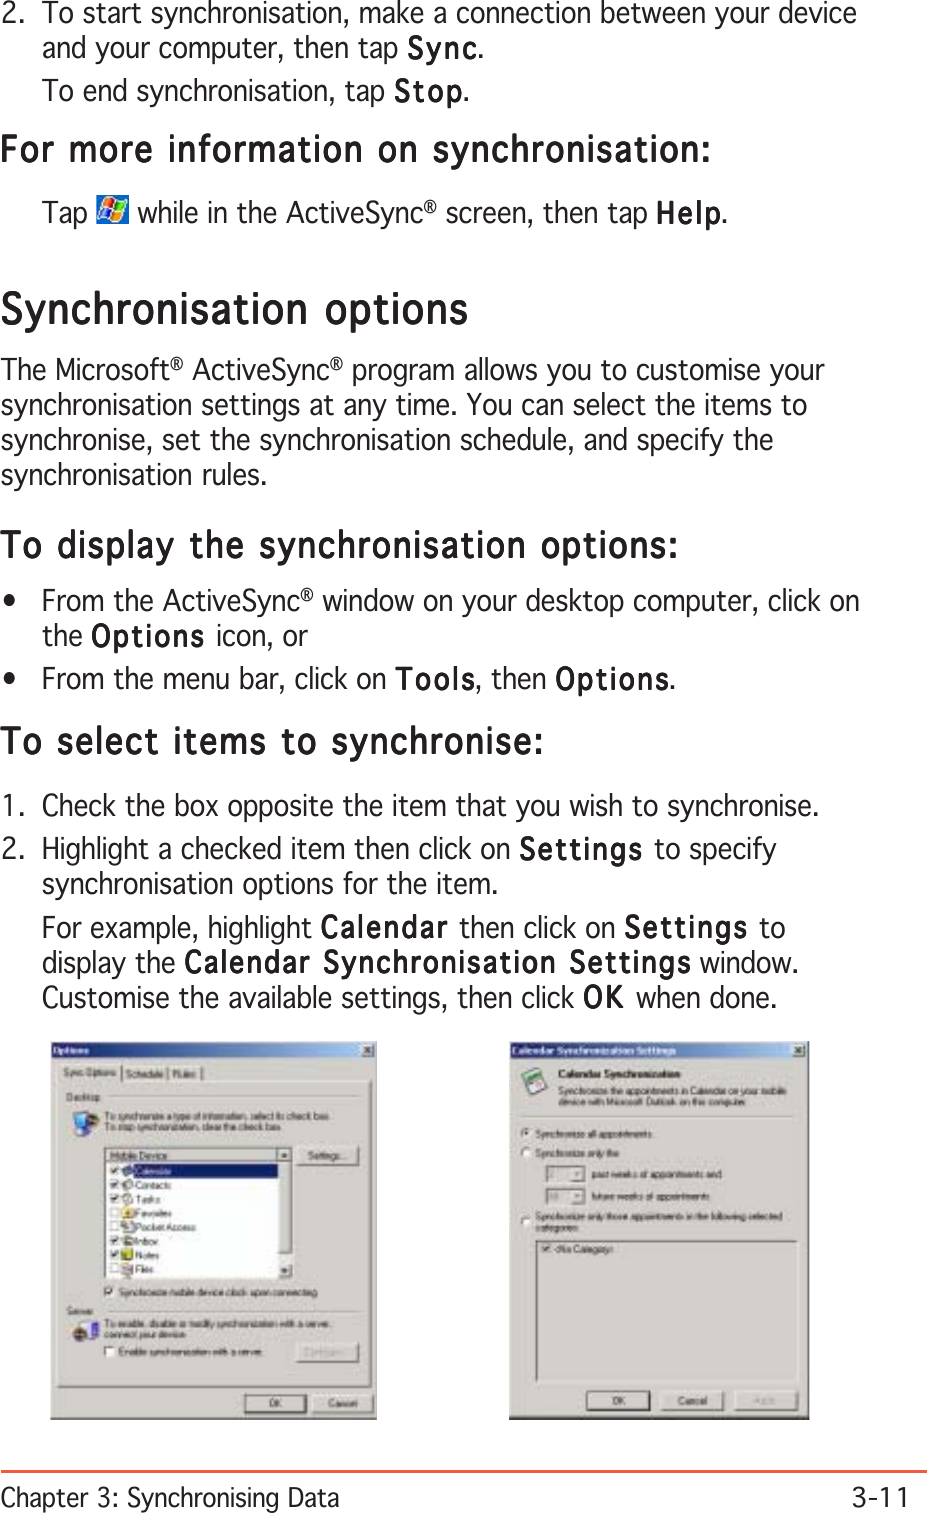 Chapter 3: Synchronising Data3-112. To start synchronisation, make a connection between your deviceand your computer, then tap SyncSyncSyncSyncSync.To end synchronisation, tap StopStopStopStopStop.For more information on synchronisation:For more information on synchronisation:For more information on synchronisation:For more information on synchronisation:For more information on synchronisation:Tap  while in the ActiveSync® screen, then tap HelpHelpHelpHelpHelp.Synchronisation optionsSynchronisation optionsSynchronisation optionsSynchronisation optionsSynchronisation optionsThe Microsoft® ActiveSync® program allows you to customise yoursynchronisation settings at any time. You can select the items tosynchronise, set the synchronisation schedule, and specify thesynchronisation rules.To display the synchronisation options:To display the synchronisation options:To display the synchronisation options:To display the synchronisation options:To display the synchronisation options:• From the ActiveSync® window on your desktop computer, click onthe OptionsOptionsOptionsOptionsOptions icon, or• From the menu bar, click on ToolsToolsToolsToolsTools, then OptionsOptionsOptionsOptionsOptions.To select items to synchronise:To select items to synchronise:To select items to synchronise:To select items to synchronise:To select items to synchronise:1. Check the box opposite the item that you wish to synchronise.2. Highlight a checked item then click on SettingsSettingsSettingsSettingsSettings to specifysynchronisation options for the item.For example, highlight CalendarCalendarCalendarCalendarCalendar then click on SettingsSettingsSettingsSettingsSettings todisplay the Calendar Synchronisation SettingsCalendar Synchronisation SettingsCalendar Synchronisation SettingsCalendar Synchronisation SettingsCalendar Synchronisation Settings window.Customise the available settings, then click OKOKOKOKOK when done.